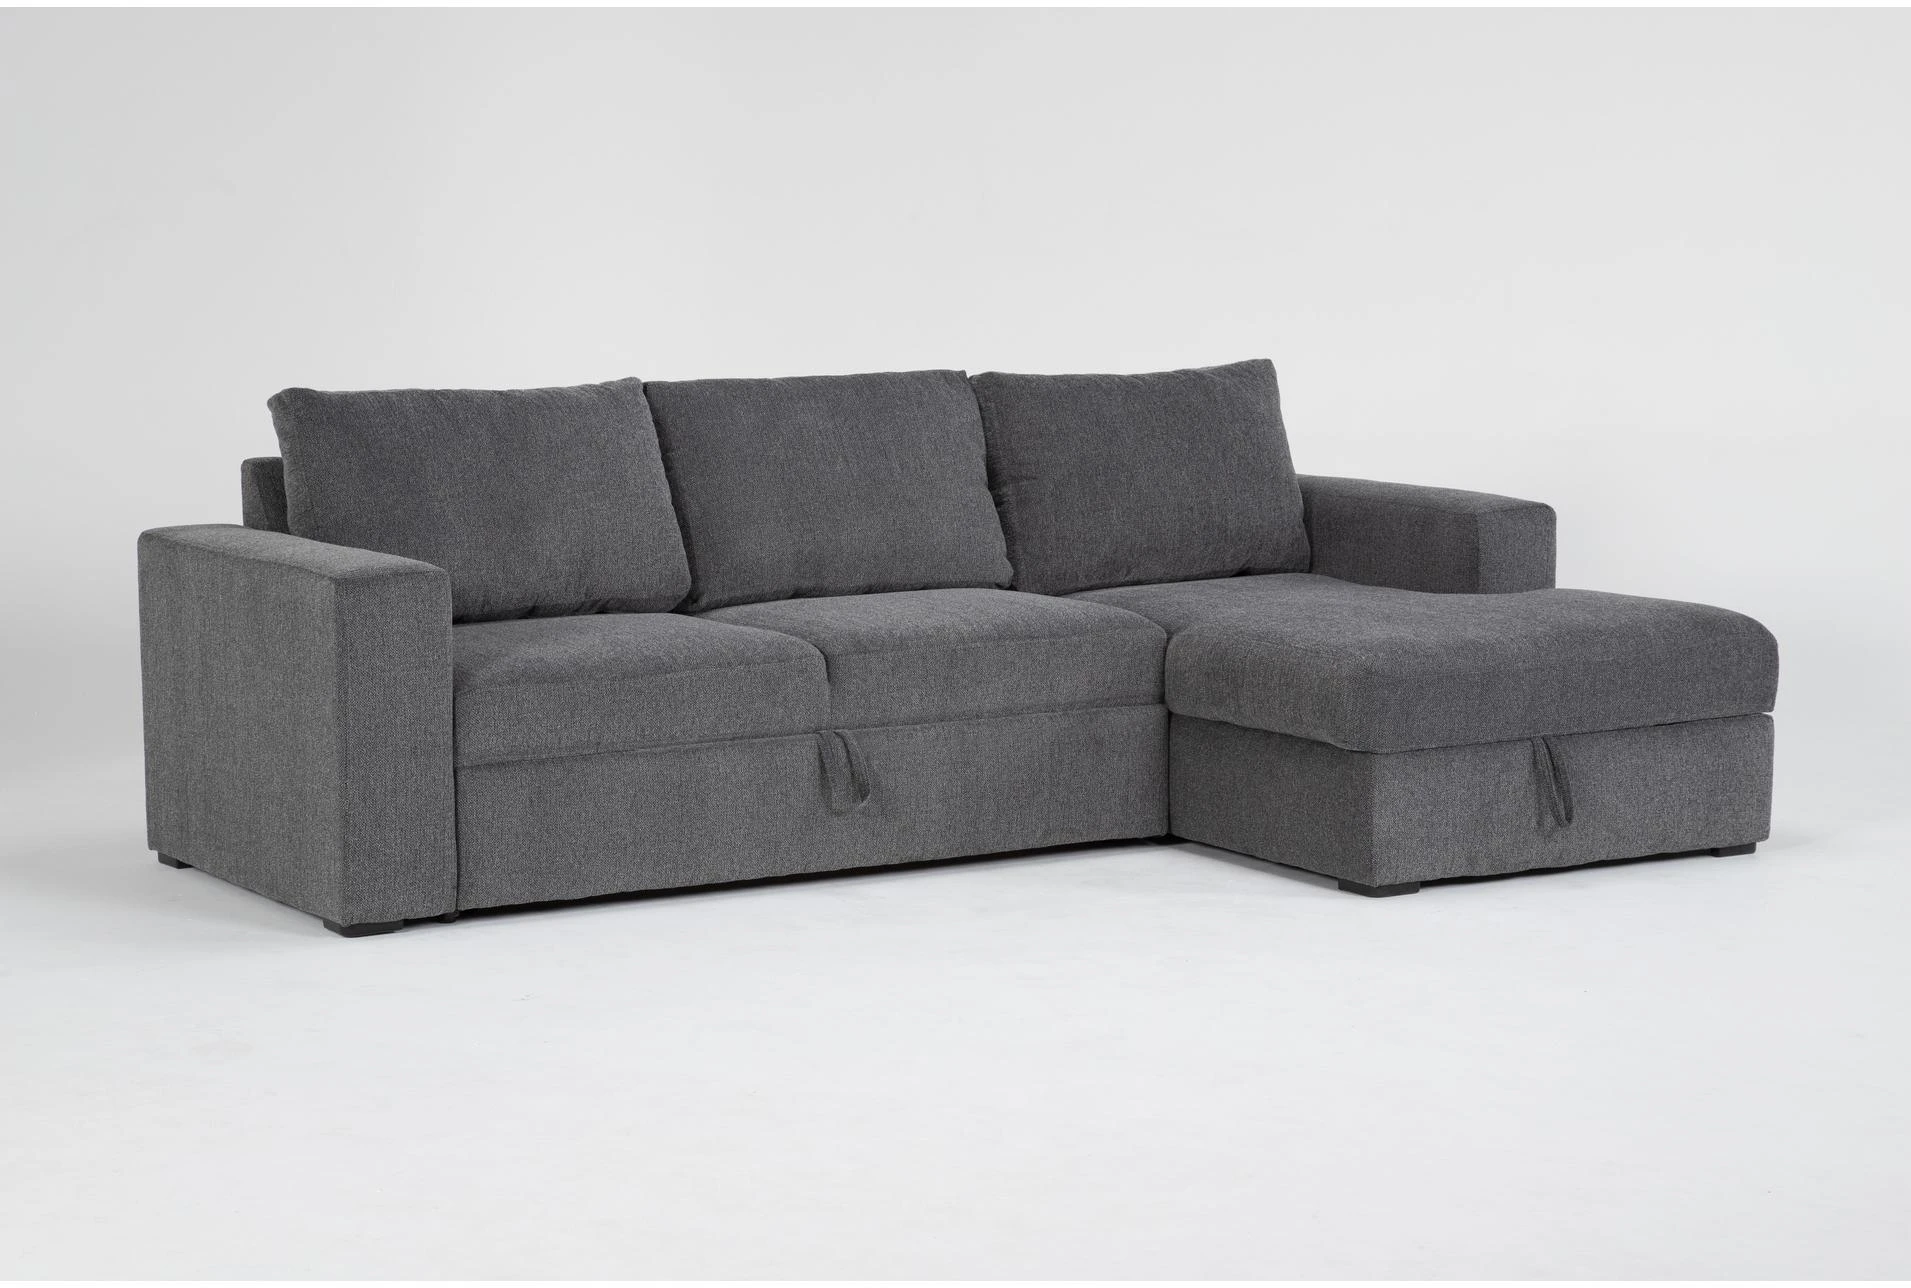 Sebastian Slate 111" 2 Piece Convertible Sleeper Sectional with Right Arm Facing Storage Chaise